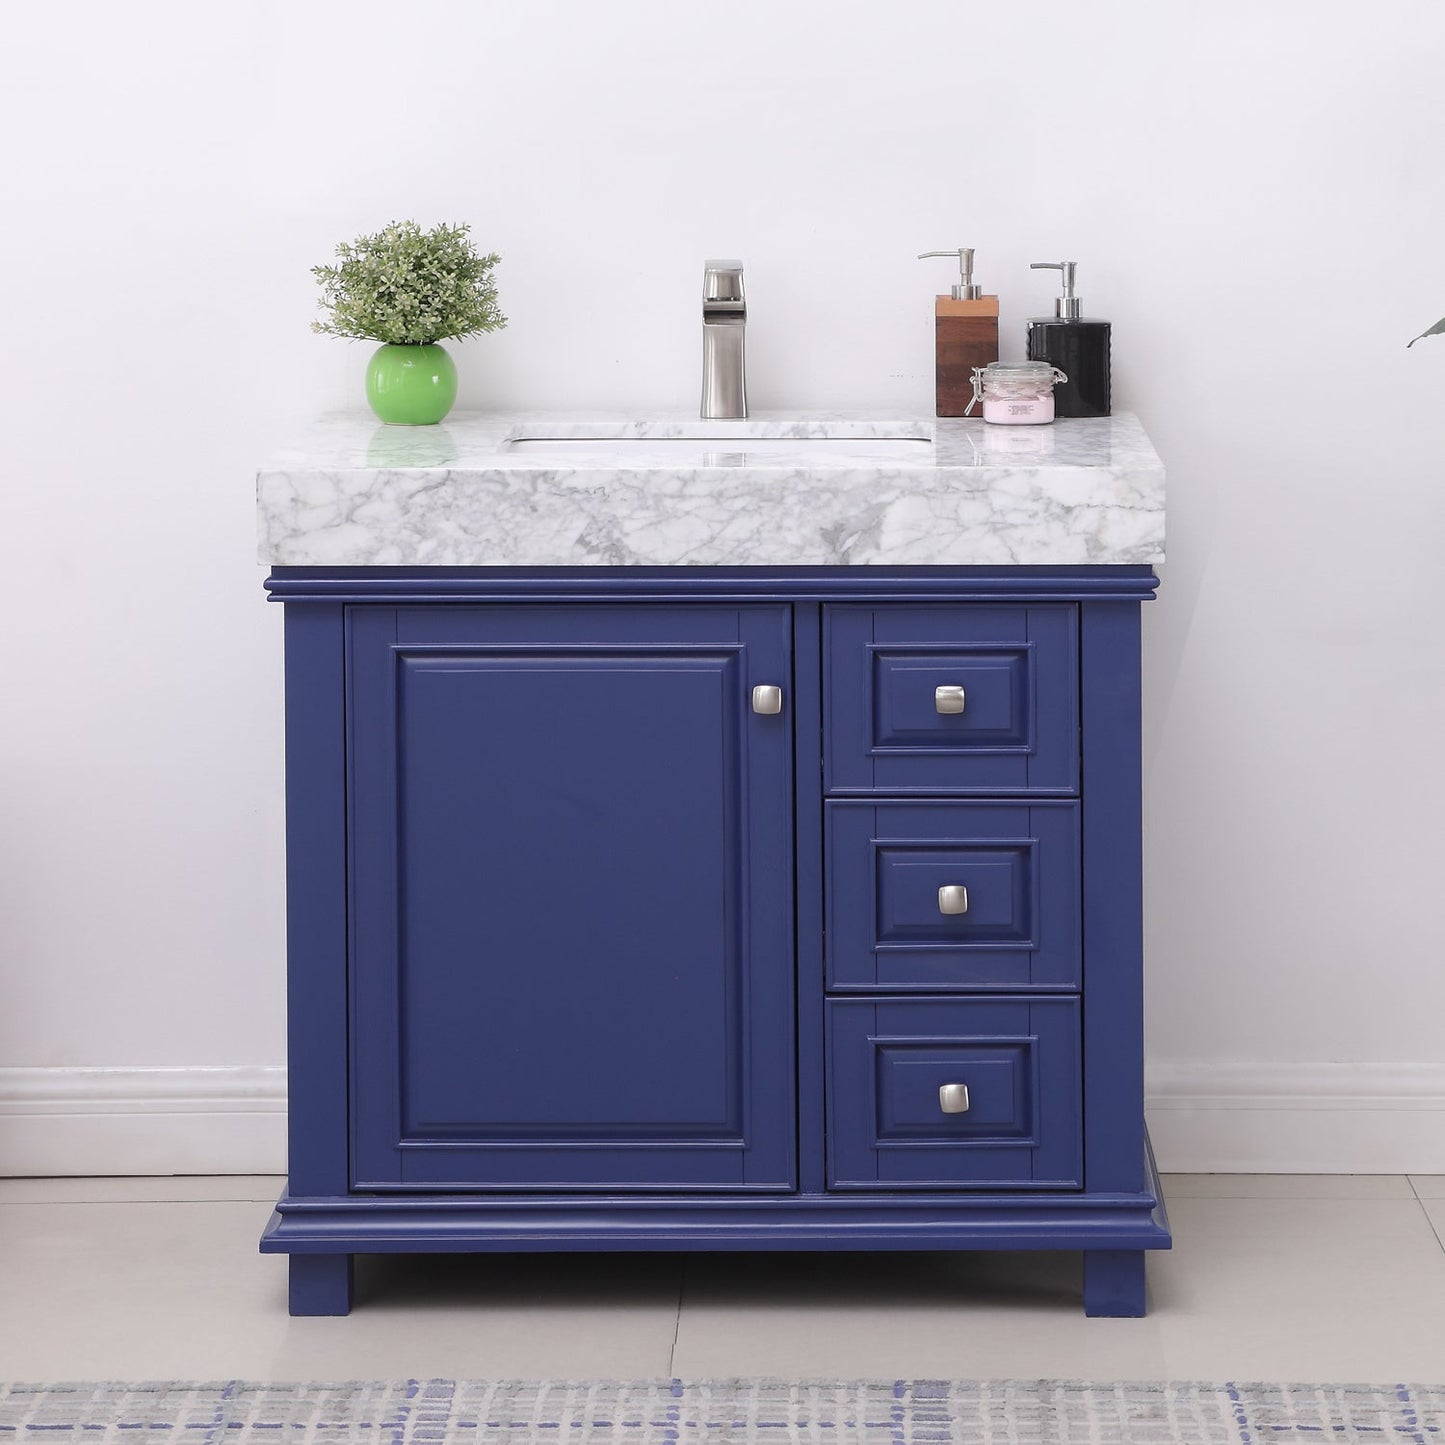 Jardin 36" Single Bathroom Vanity Set in Jewelry Blue and Carrara White Marble Countertop without Mirror